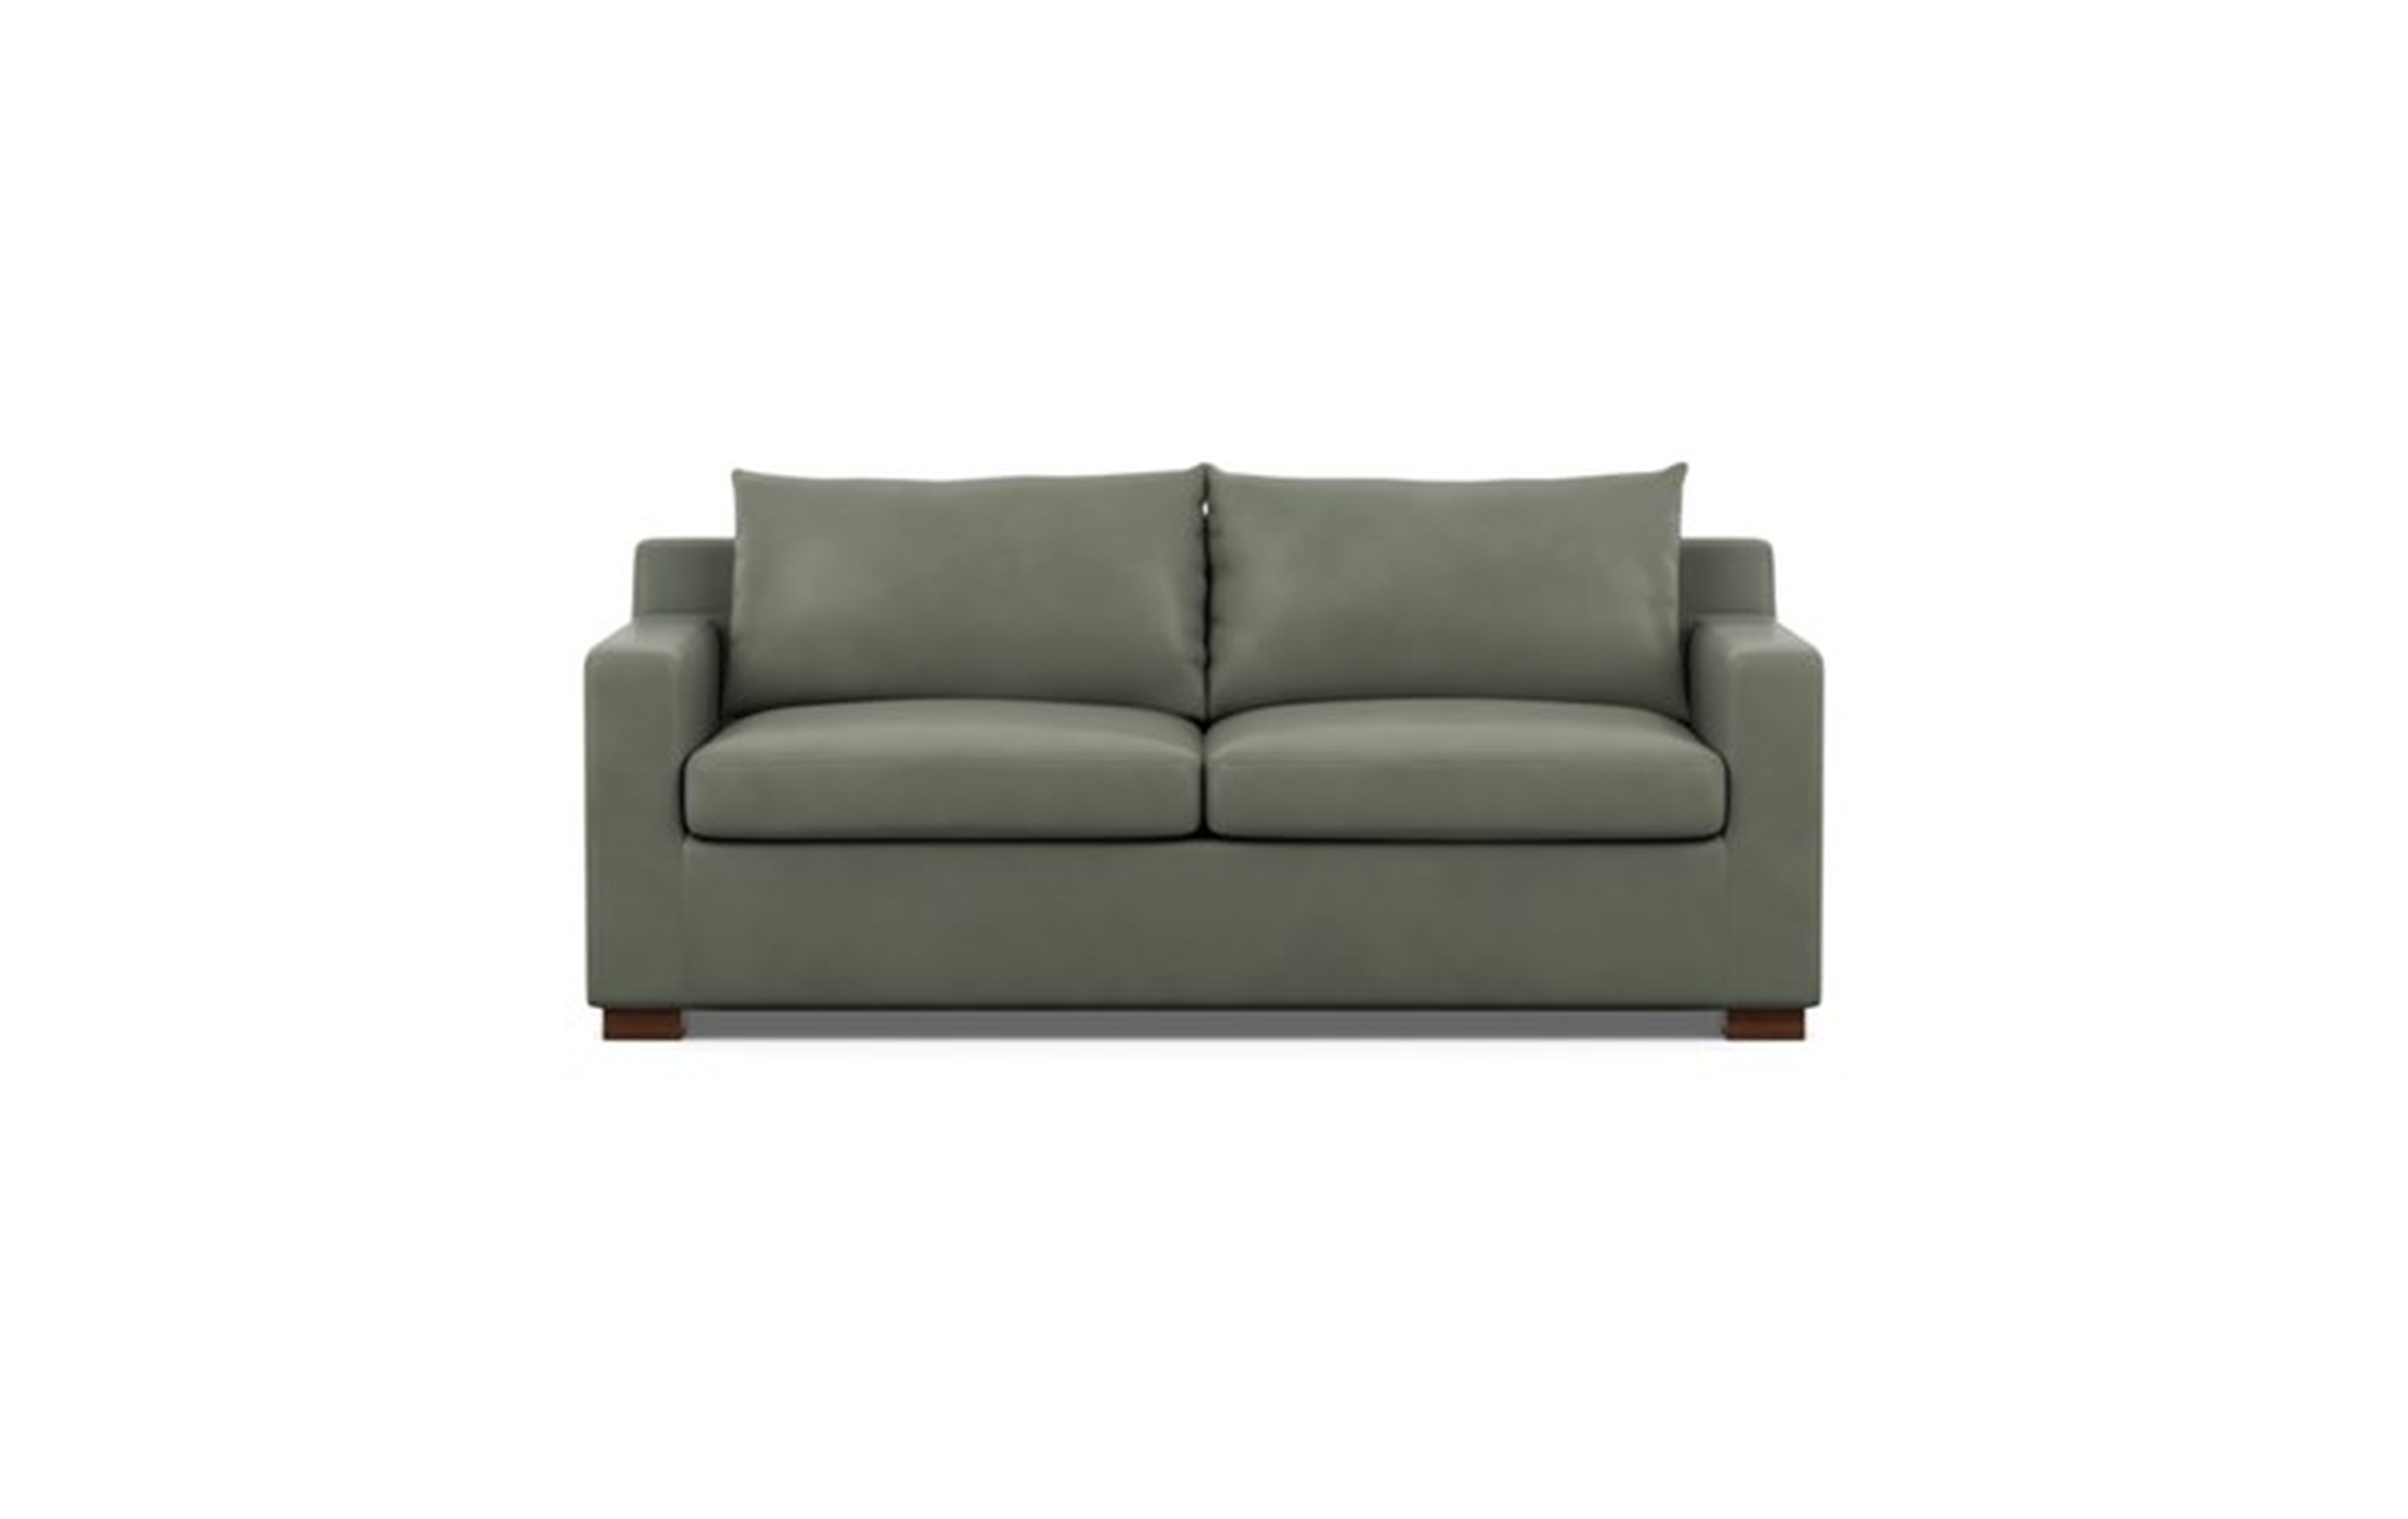 Sloan Leather Sleeper Sleeper Sofa with Grey New City Leather and Oiled Walnut legs - Interior Define